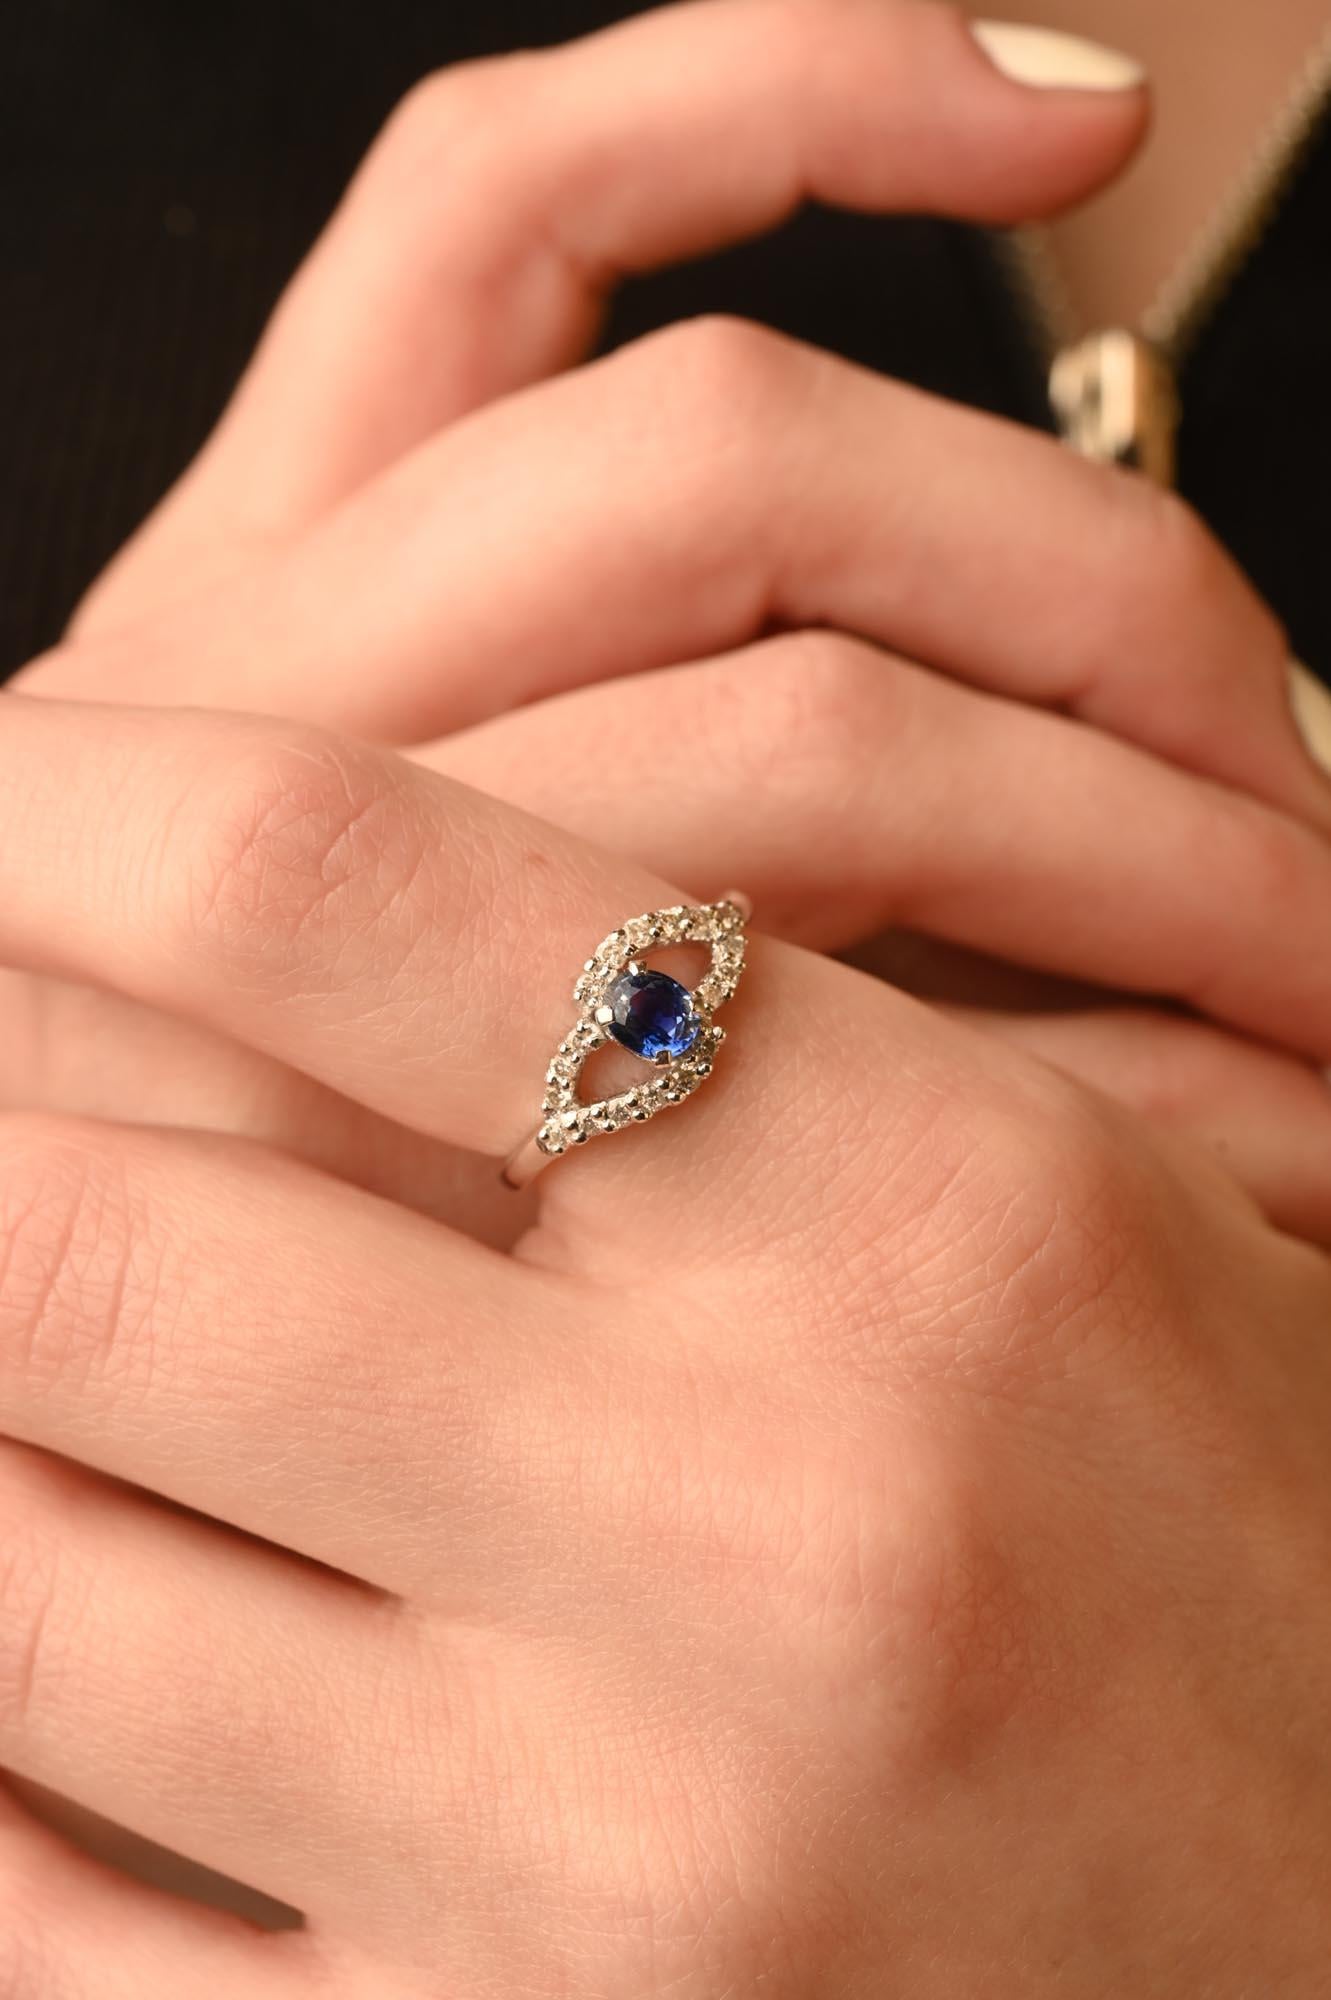 For Sale:  Alluring Blue Sapphire Ring with Diamonds Set in 14K Solid White Gold 2